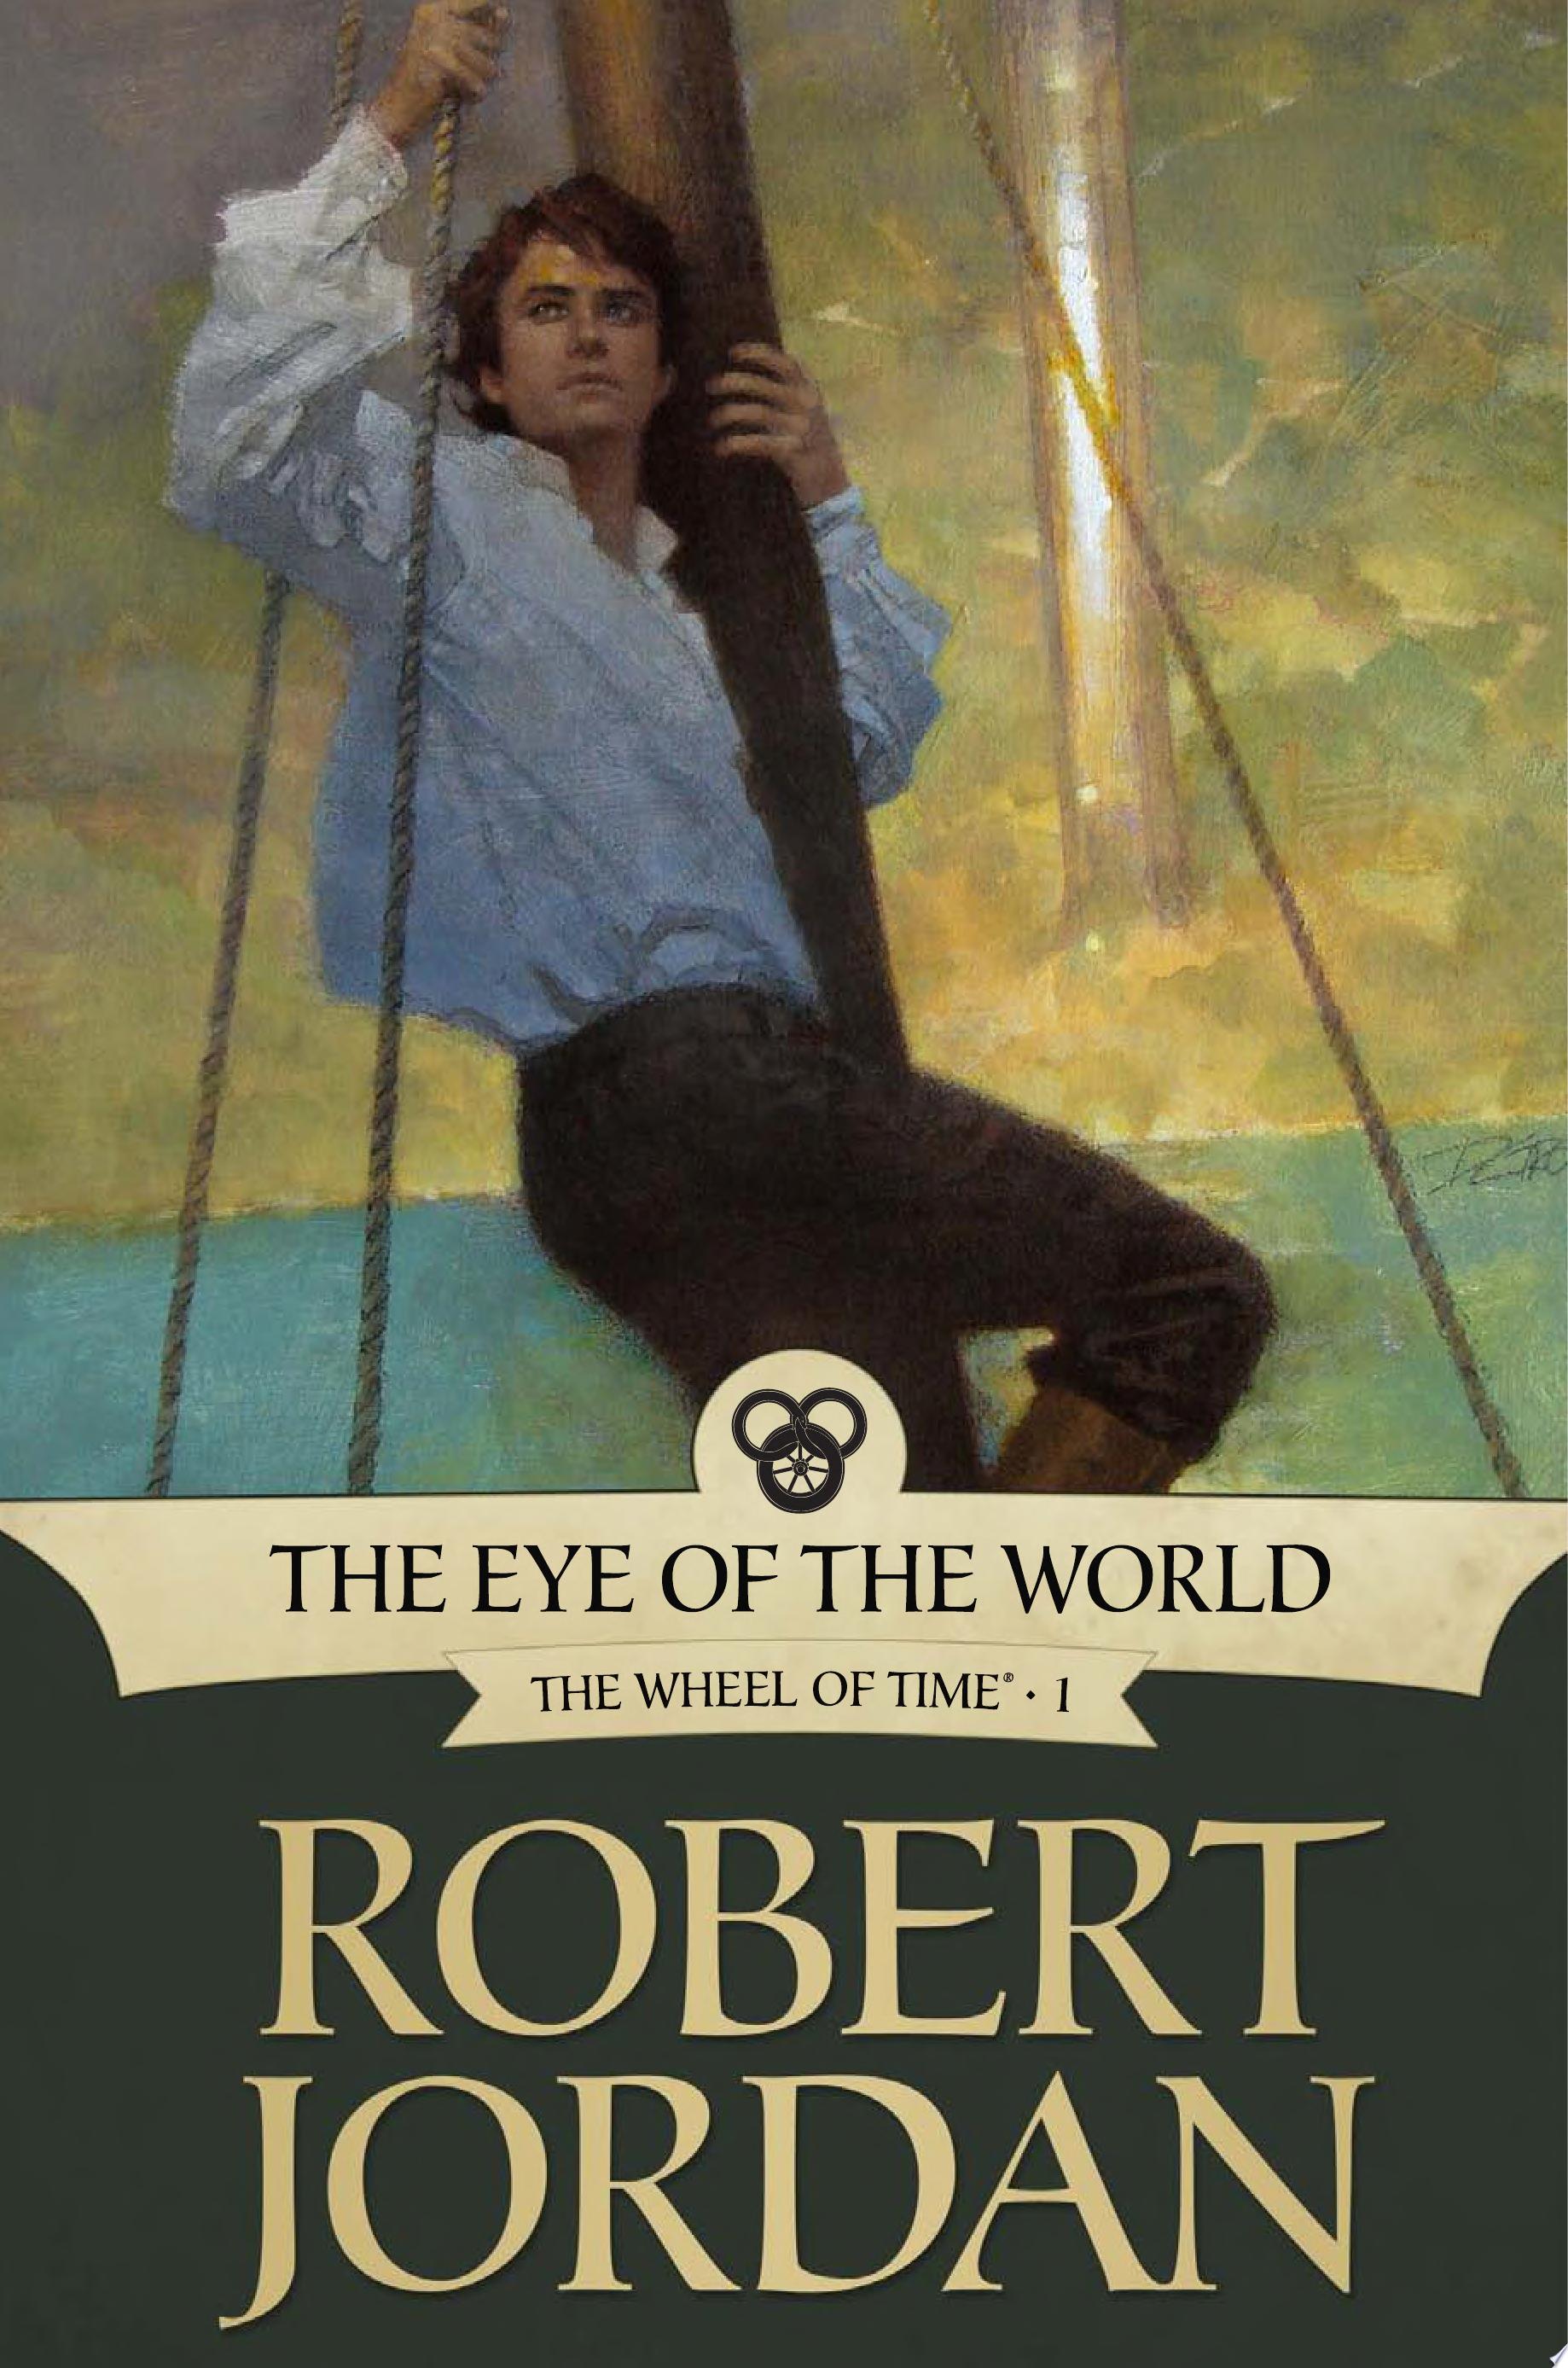 Image for "The Eye of the World"